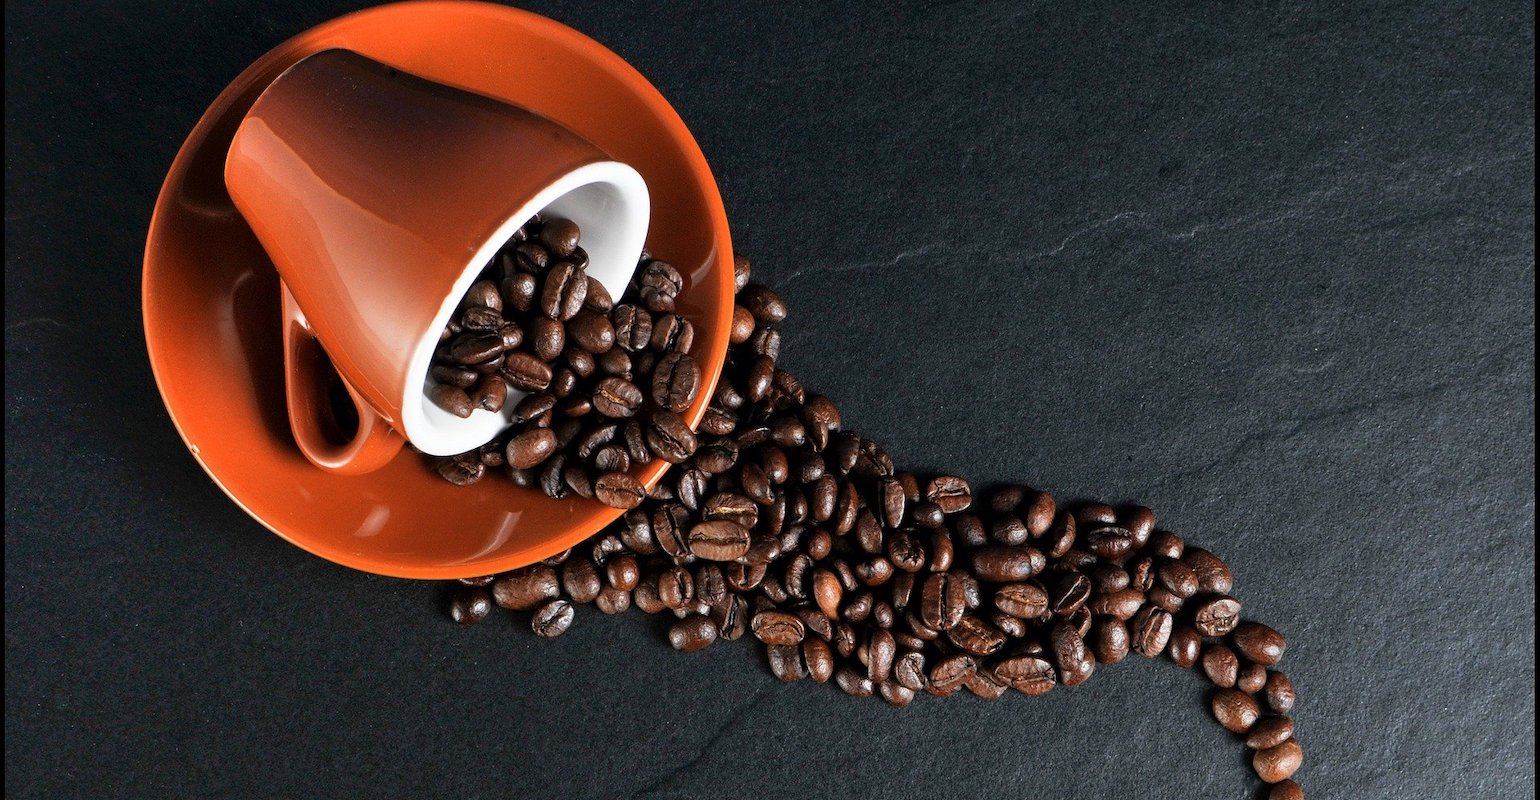 Lavazza to open its first coffee roasting plant in the United